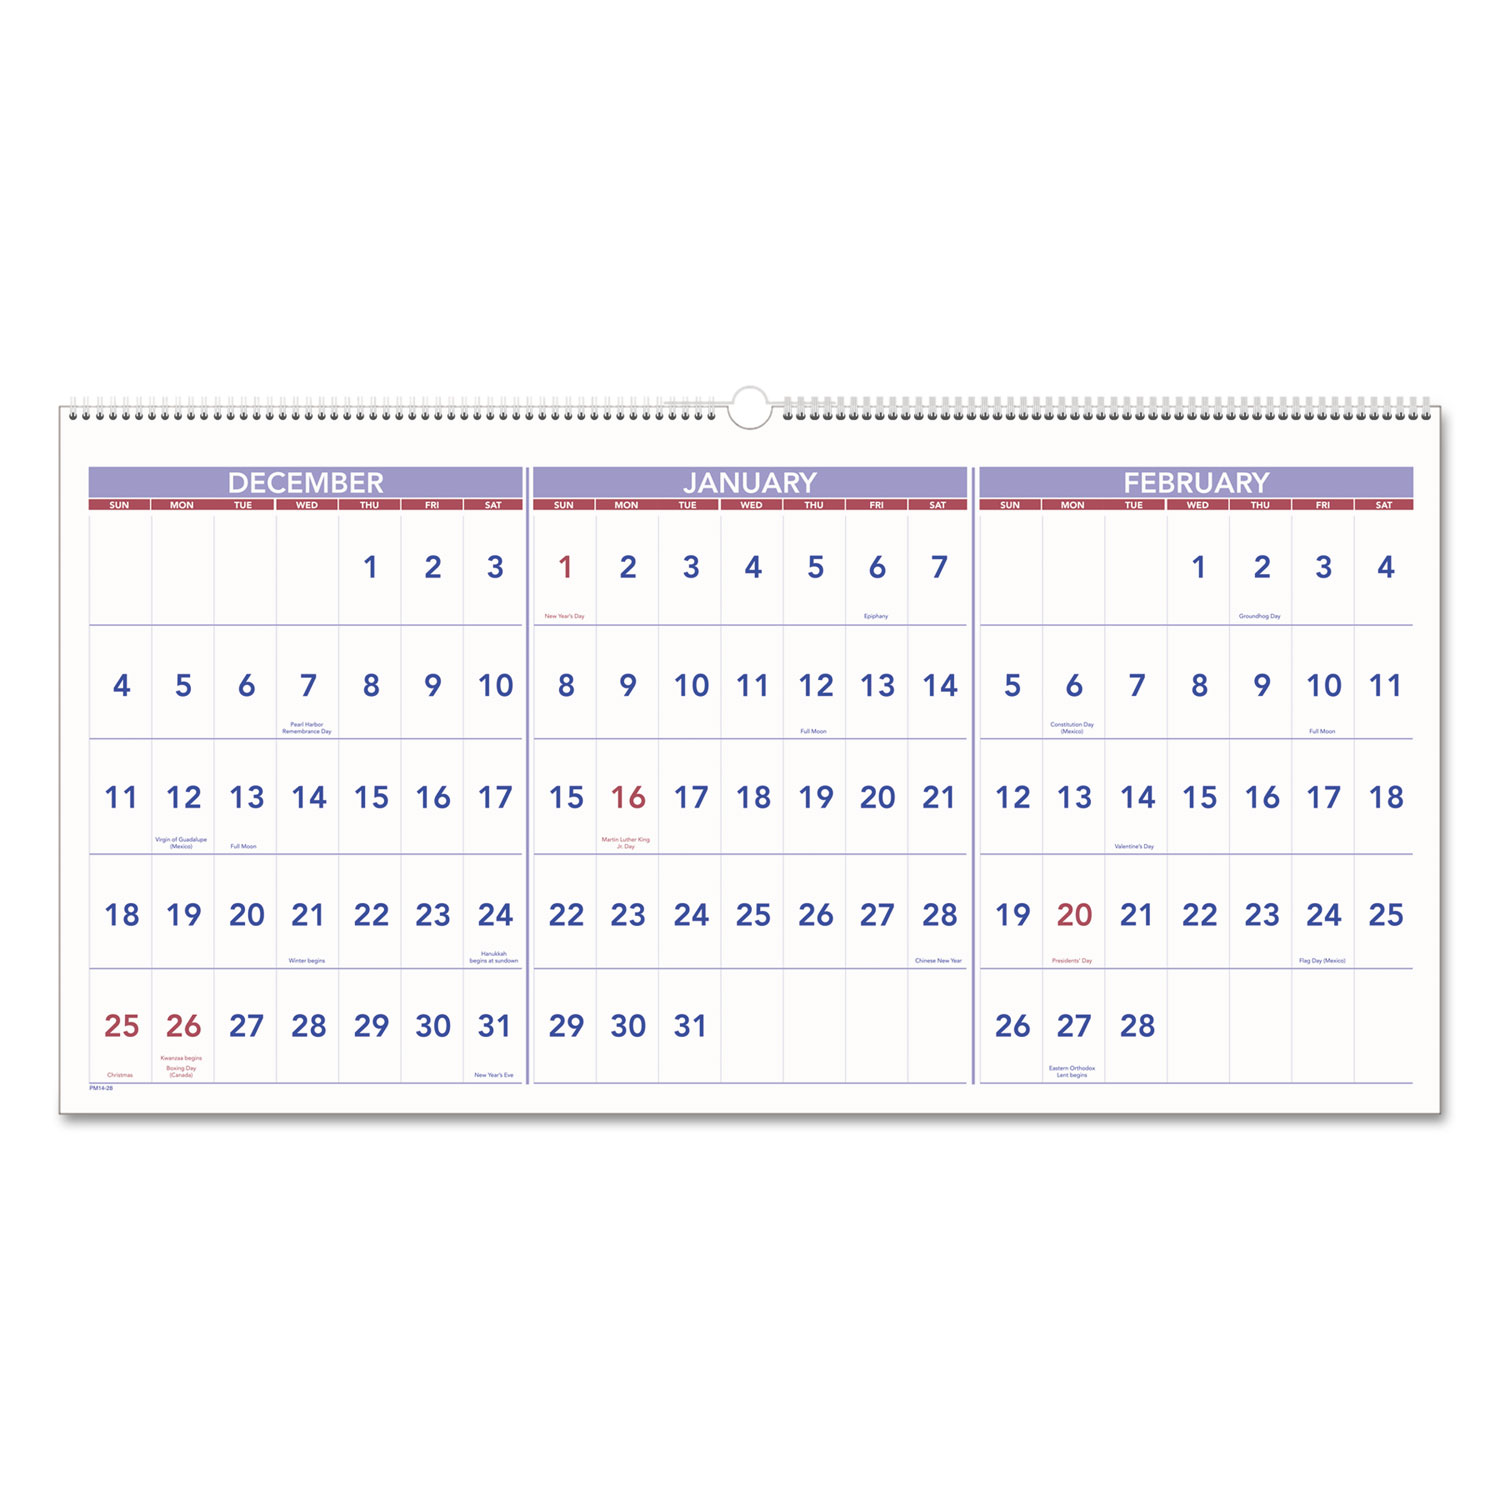 Horizontal-Format Three-Month Reference Wall Calendar, 23 1/2 x 12, 2017-2019